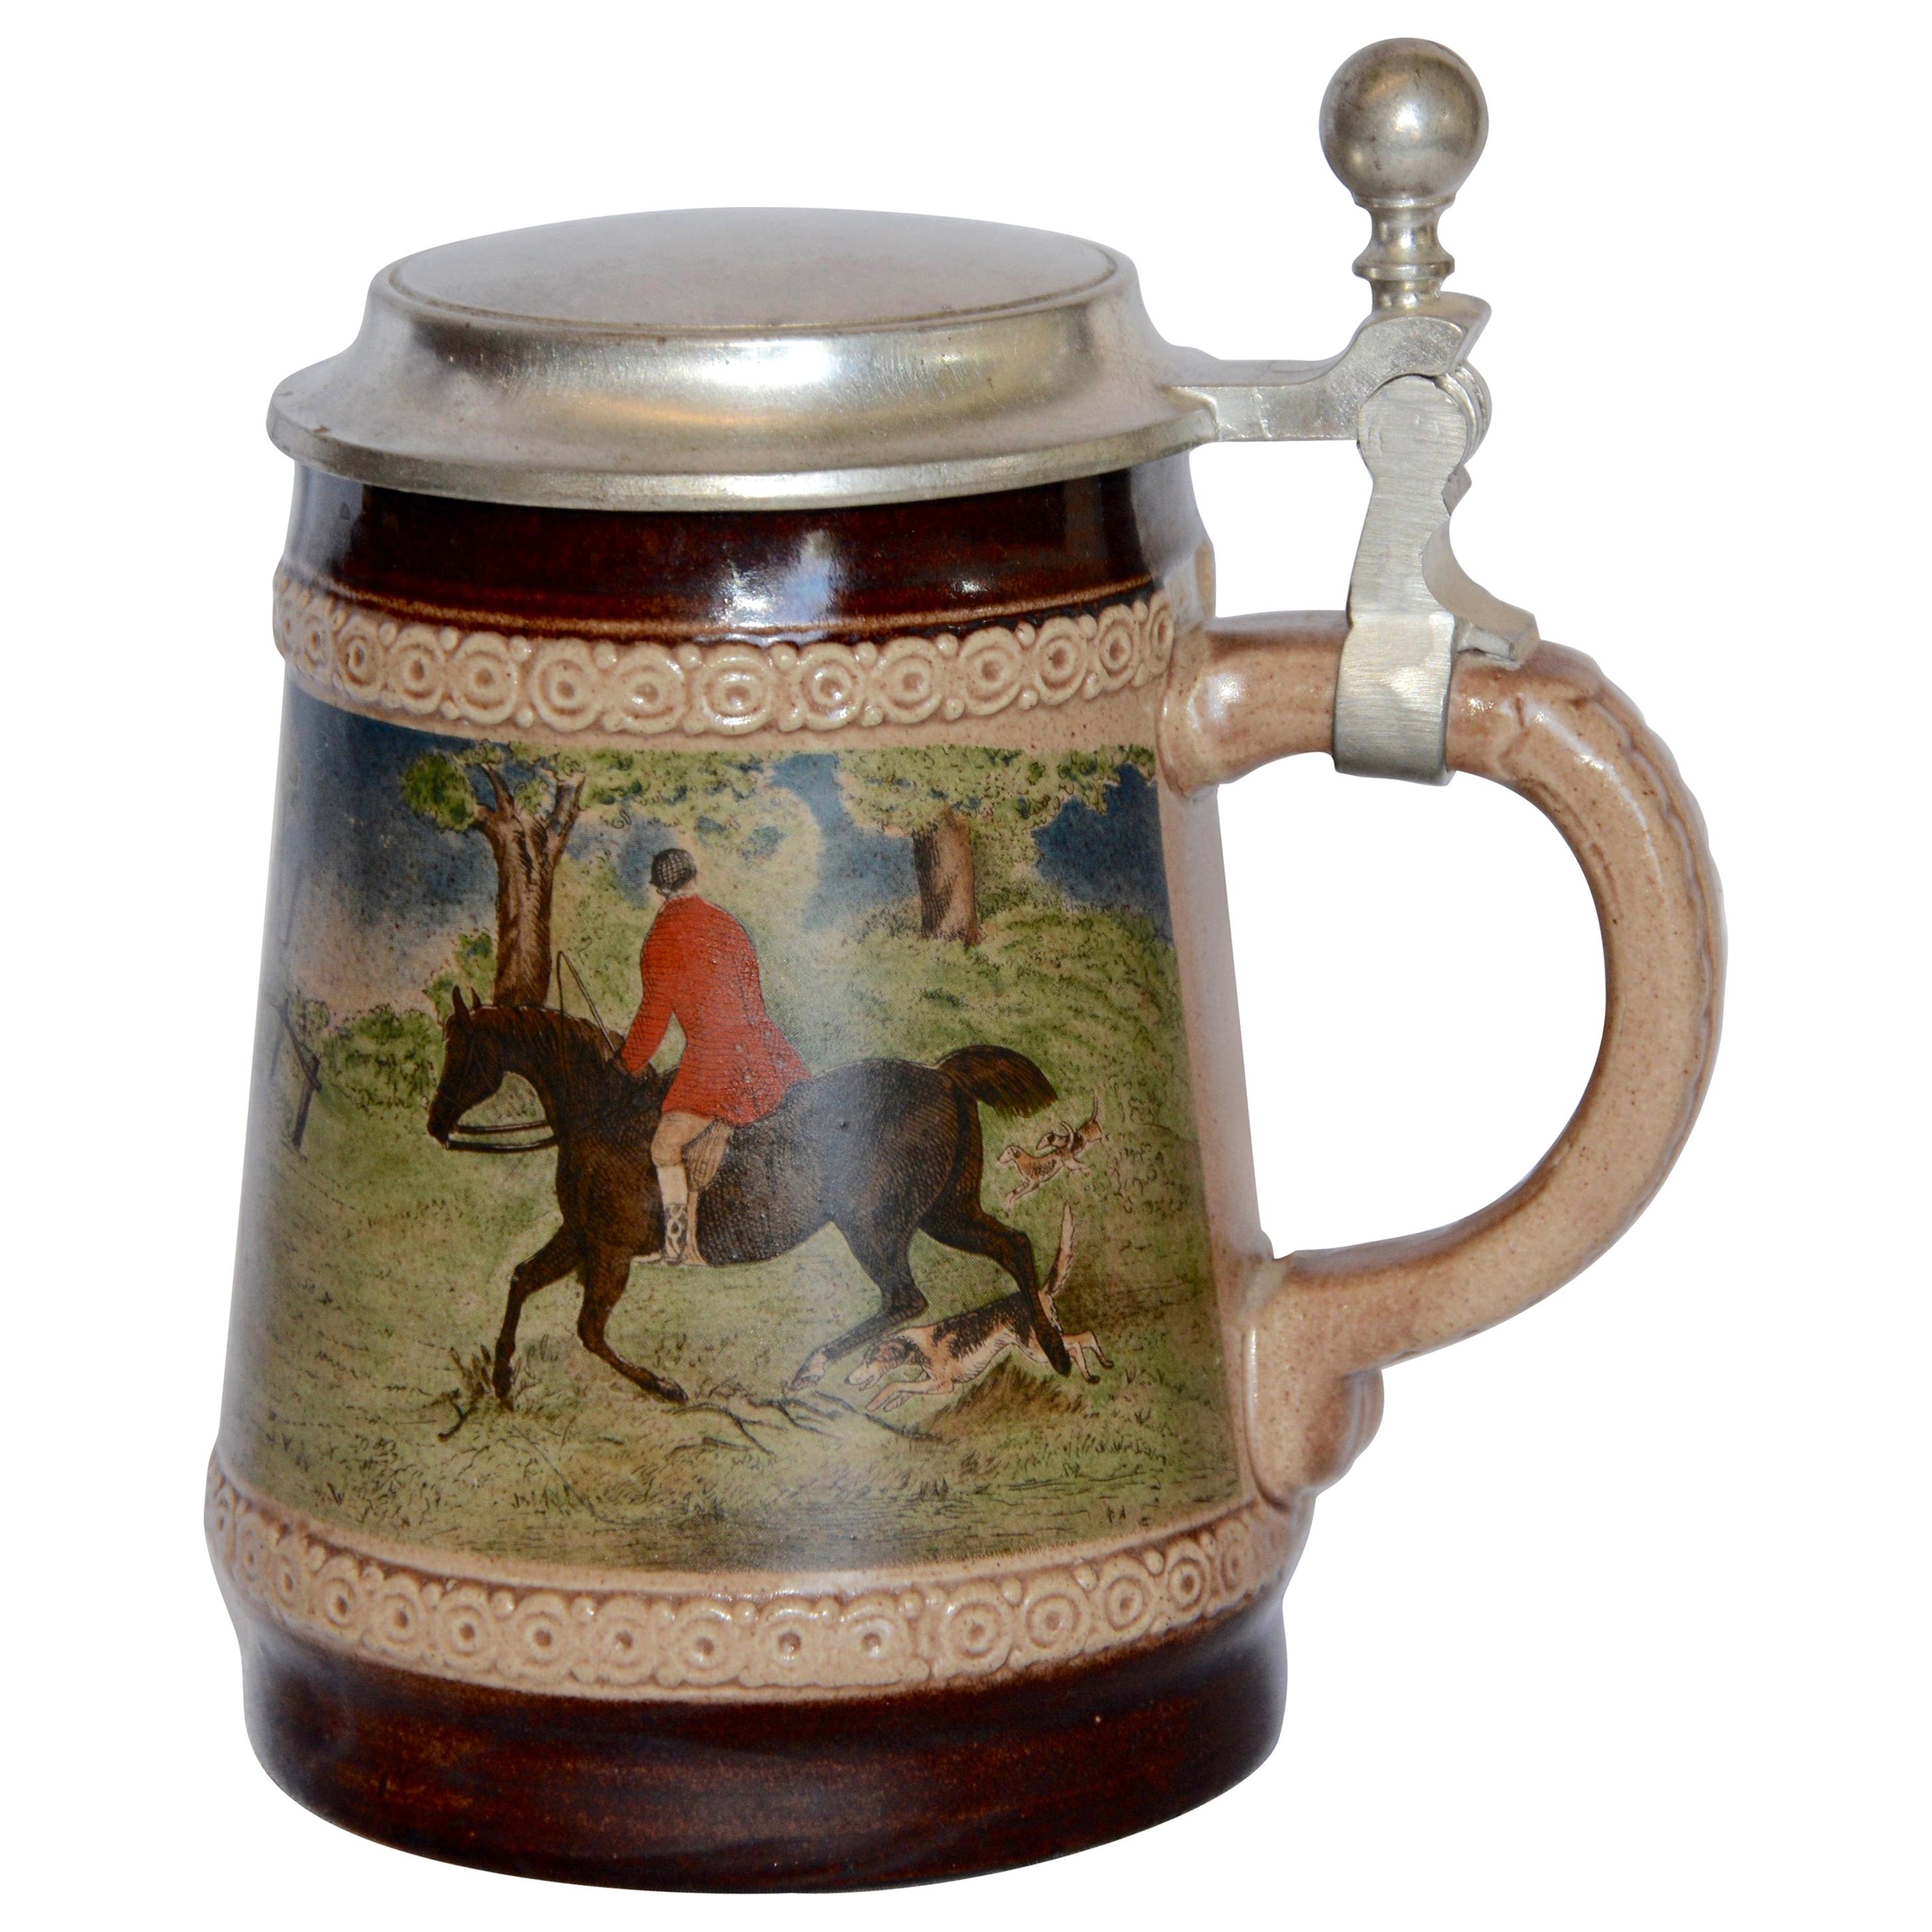 Marzi and Remy German Beer Stein with Fox Hunting Scene Midcentury